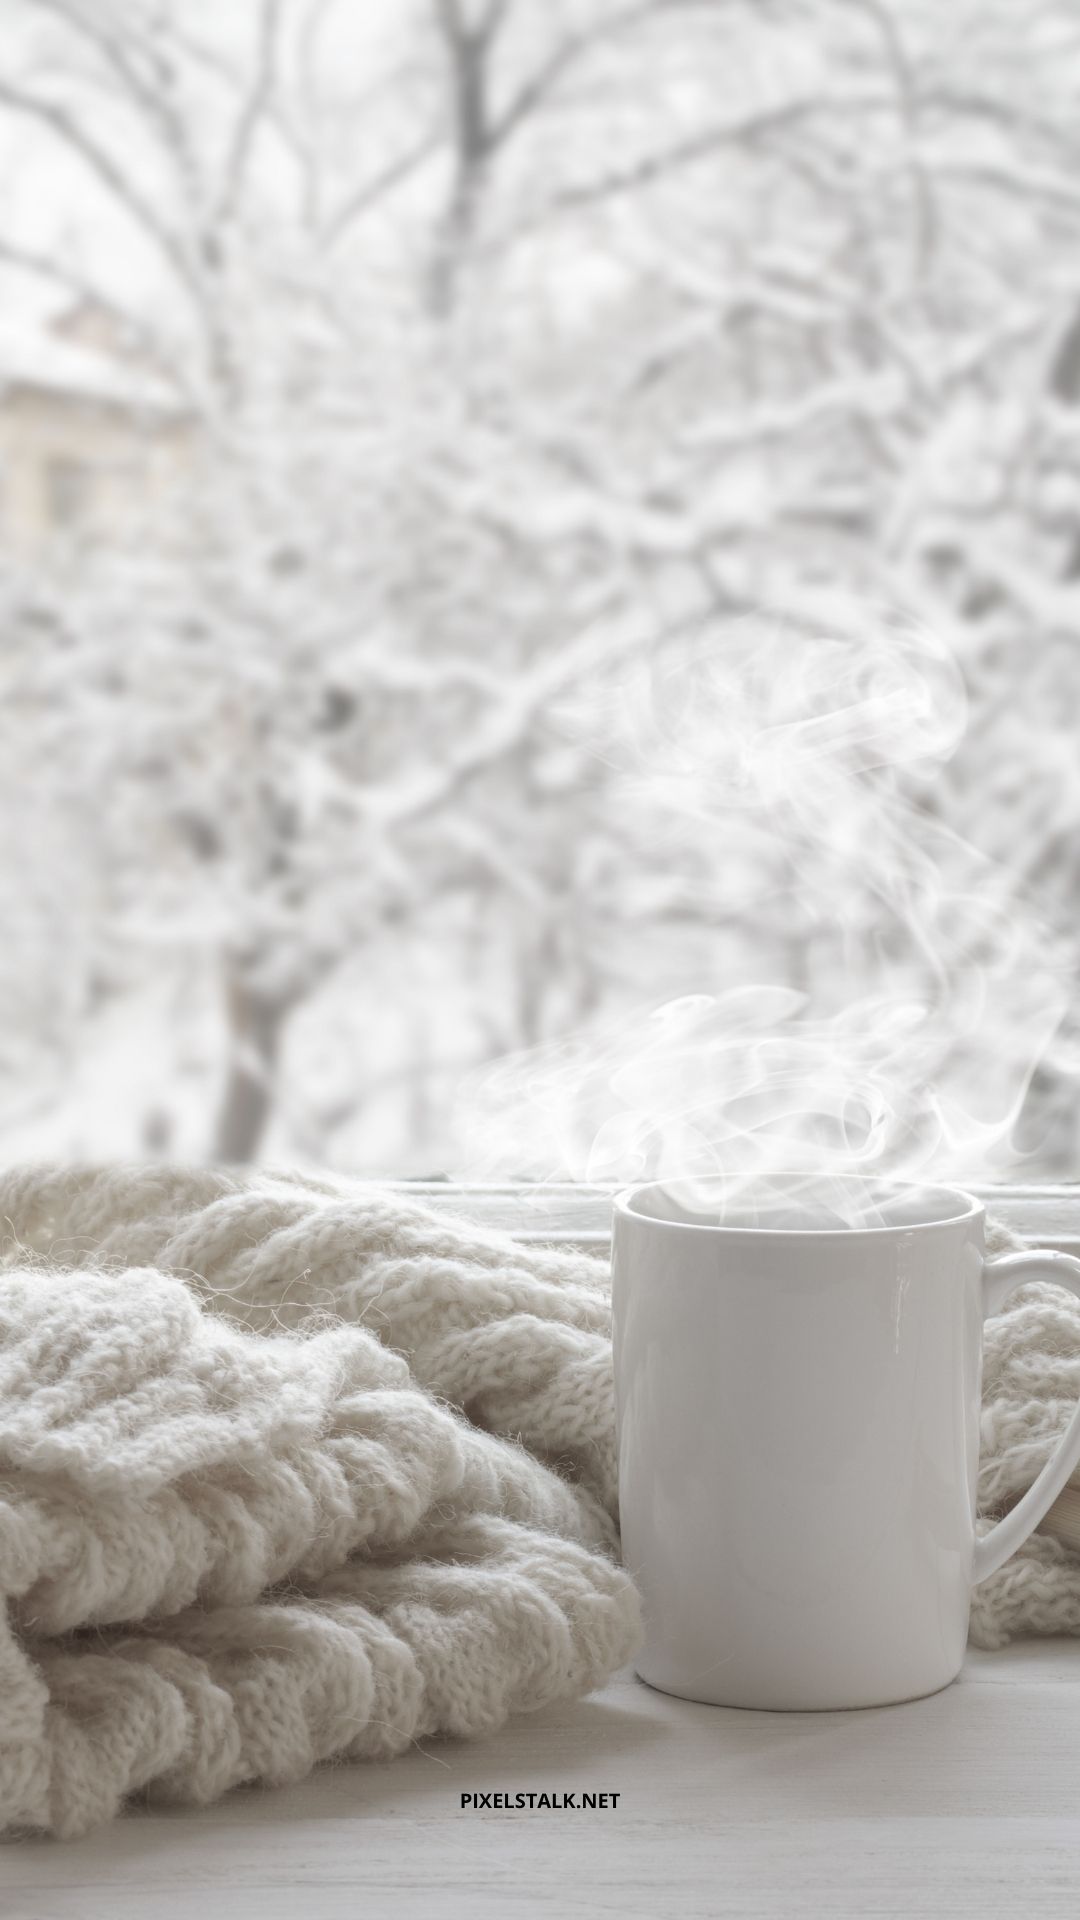 45 Free Beautiful Winter Wallpapers For iPhone That Youll Love  Winter  wallpaper Iphone wallpaper winter Cozy fireplace